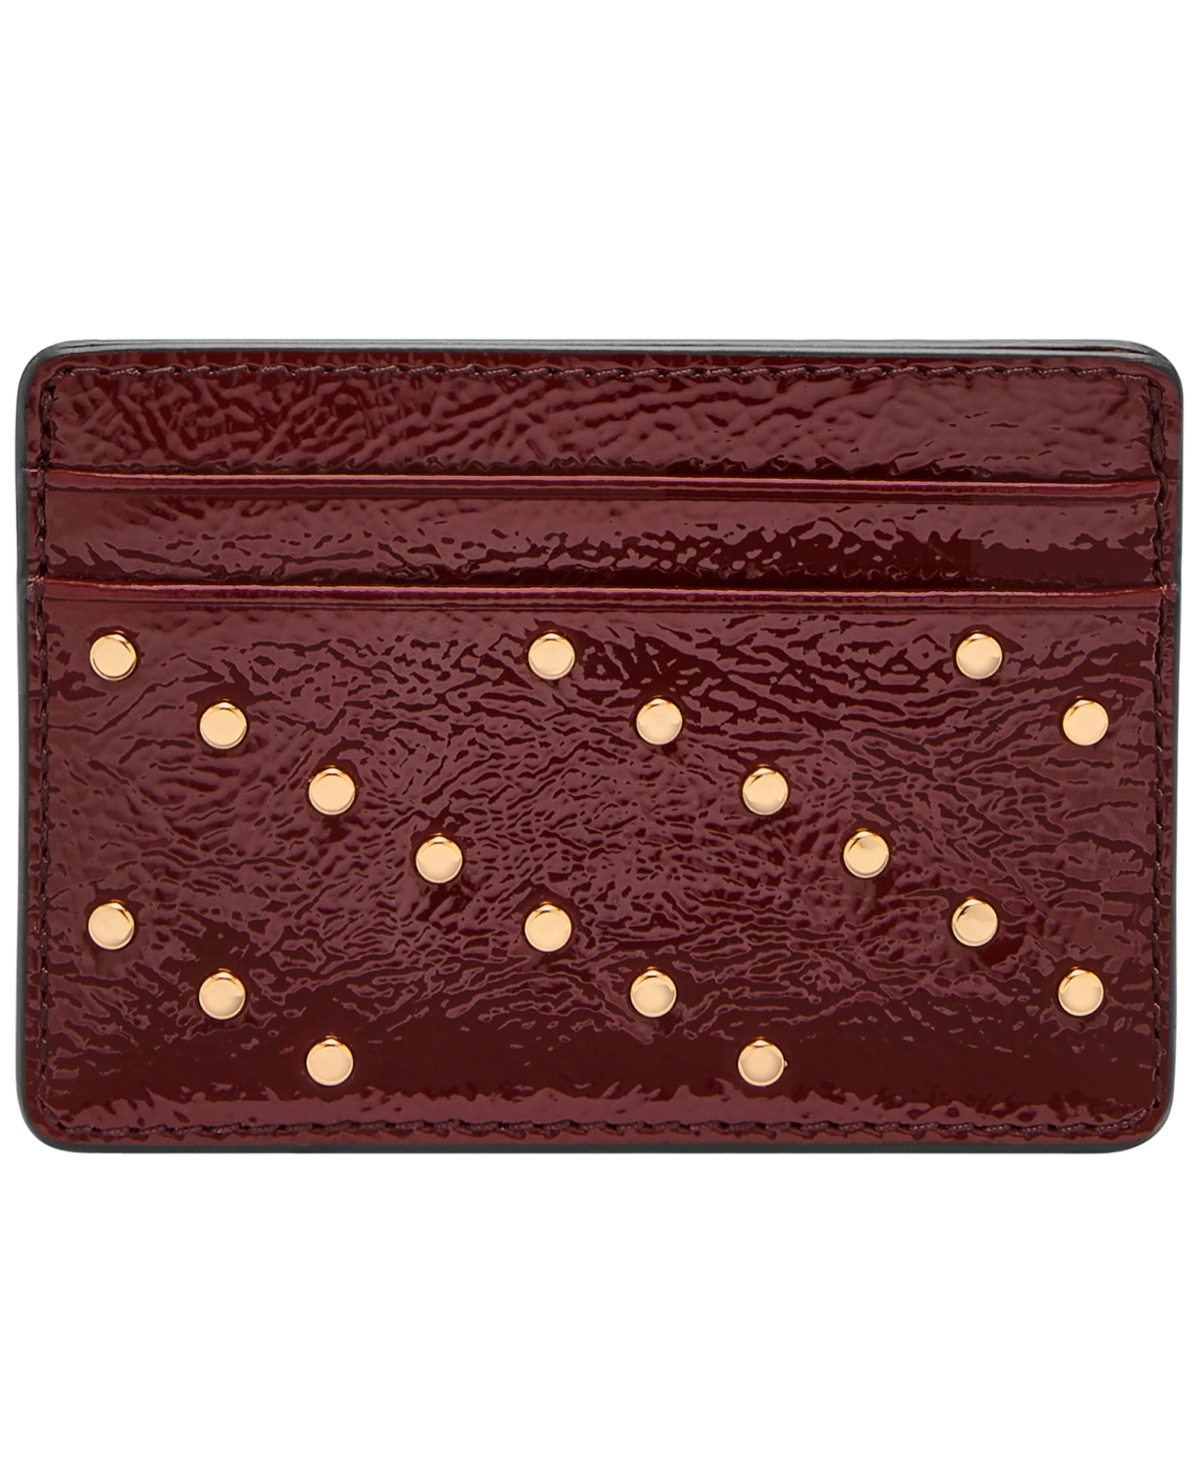 Fossil Steven Card Case Wallet In Red Mahogany